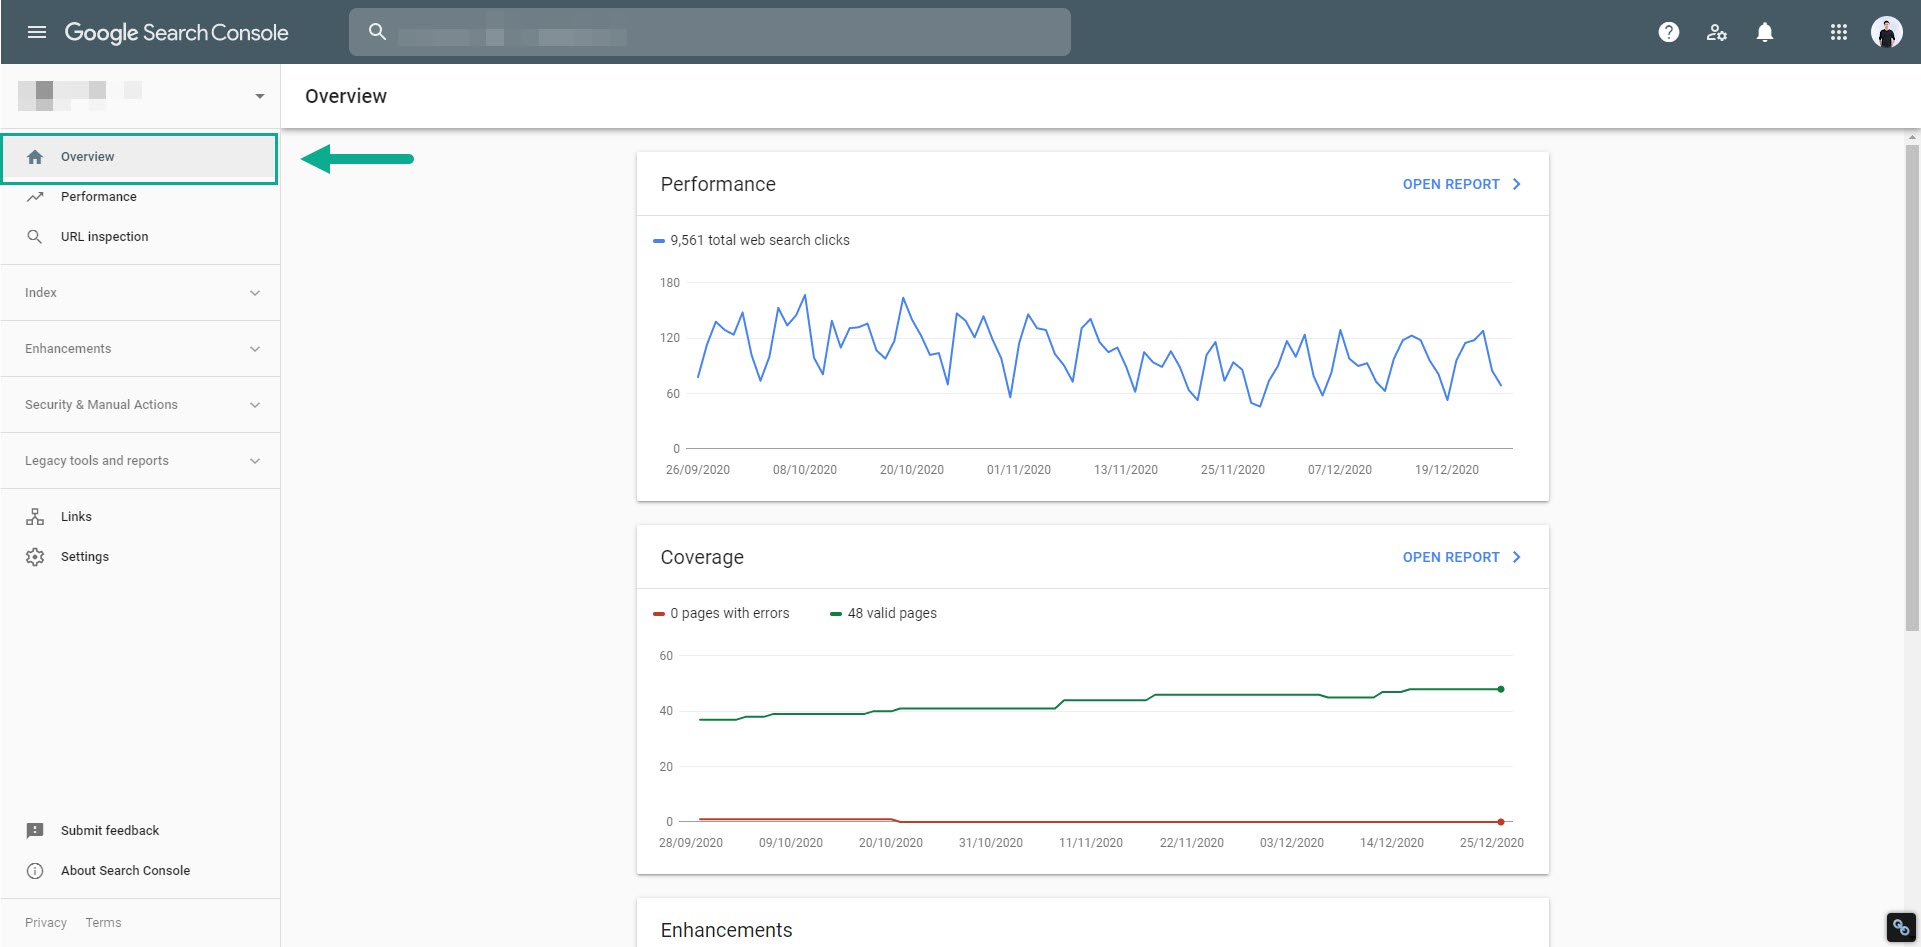 Search Console Overview